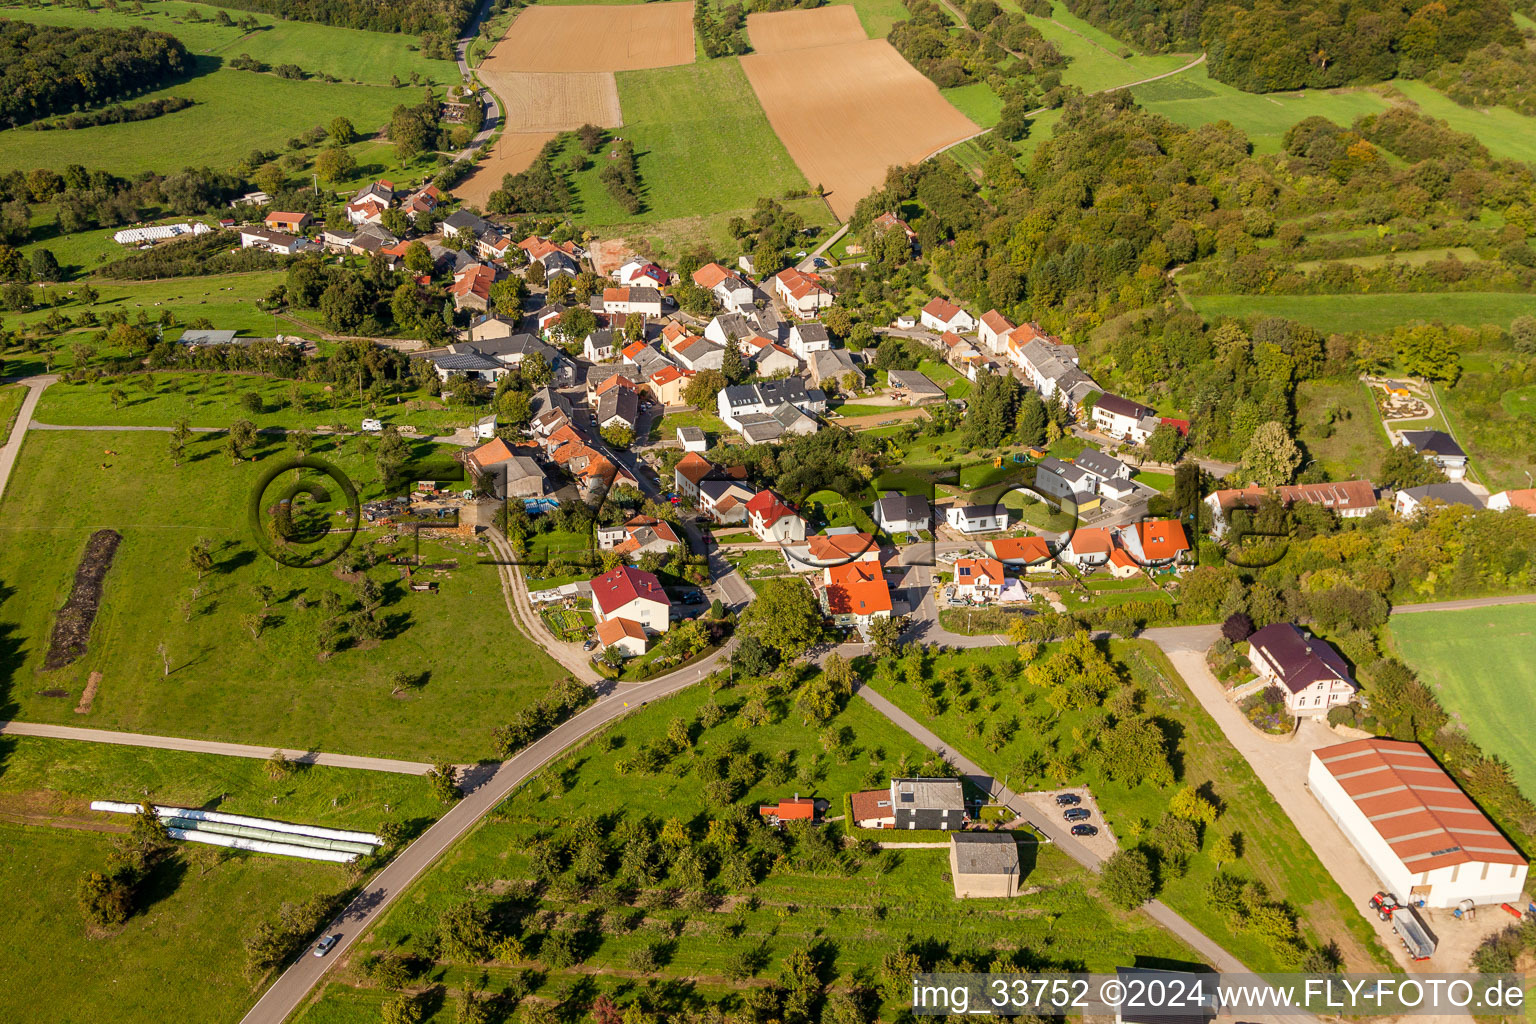 Village - view on the edge of agricultural fields and farmland in Wochern in the state Saarland, Germany